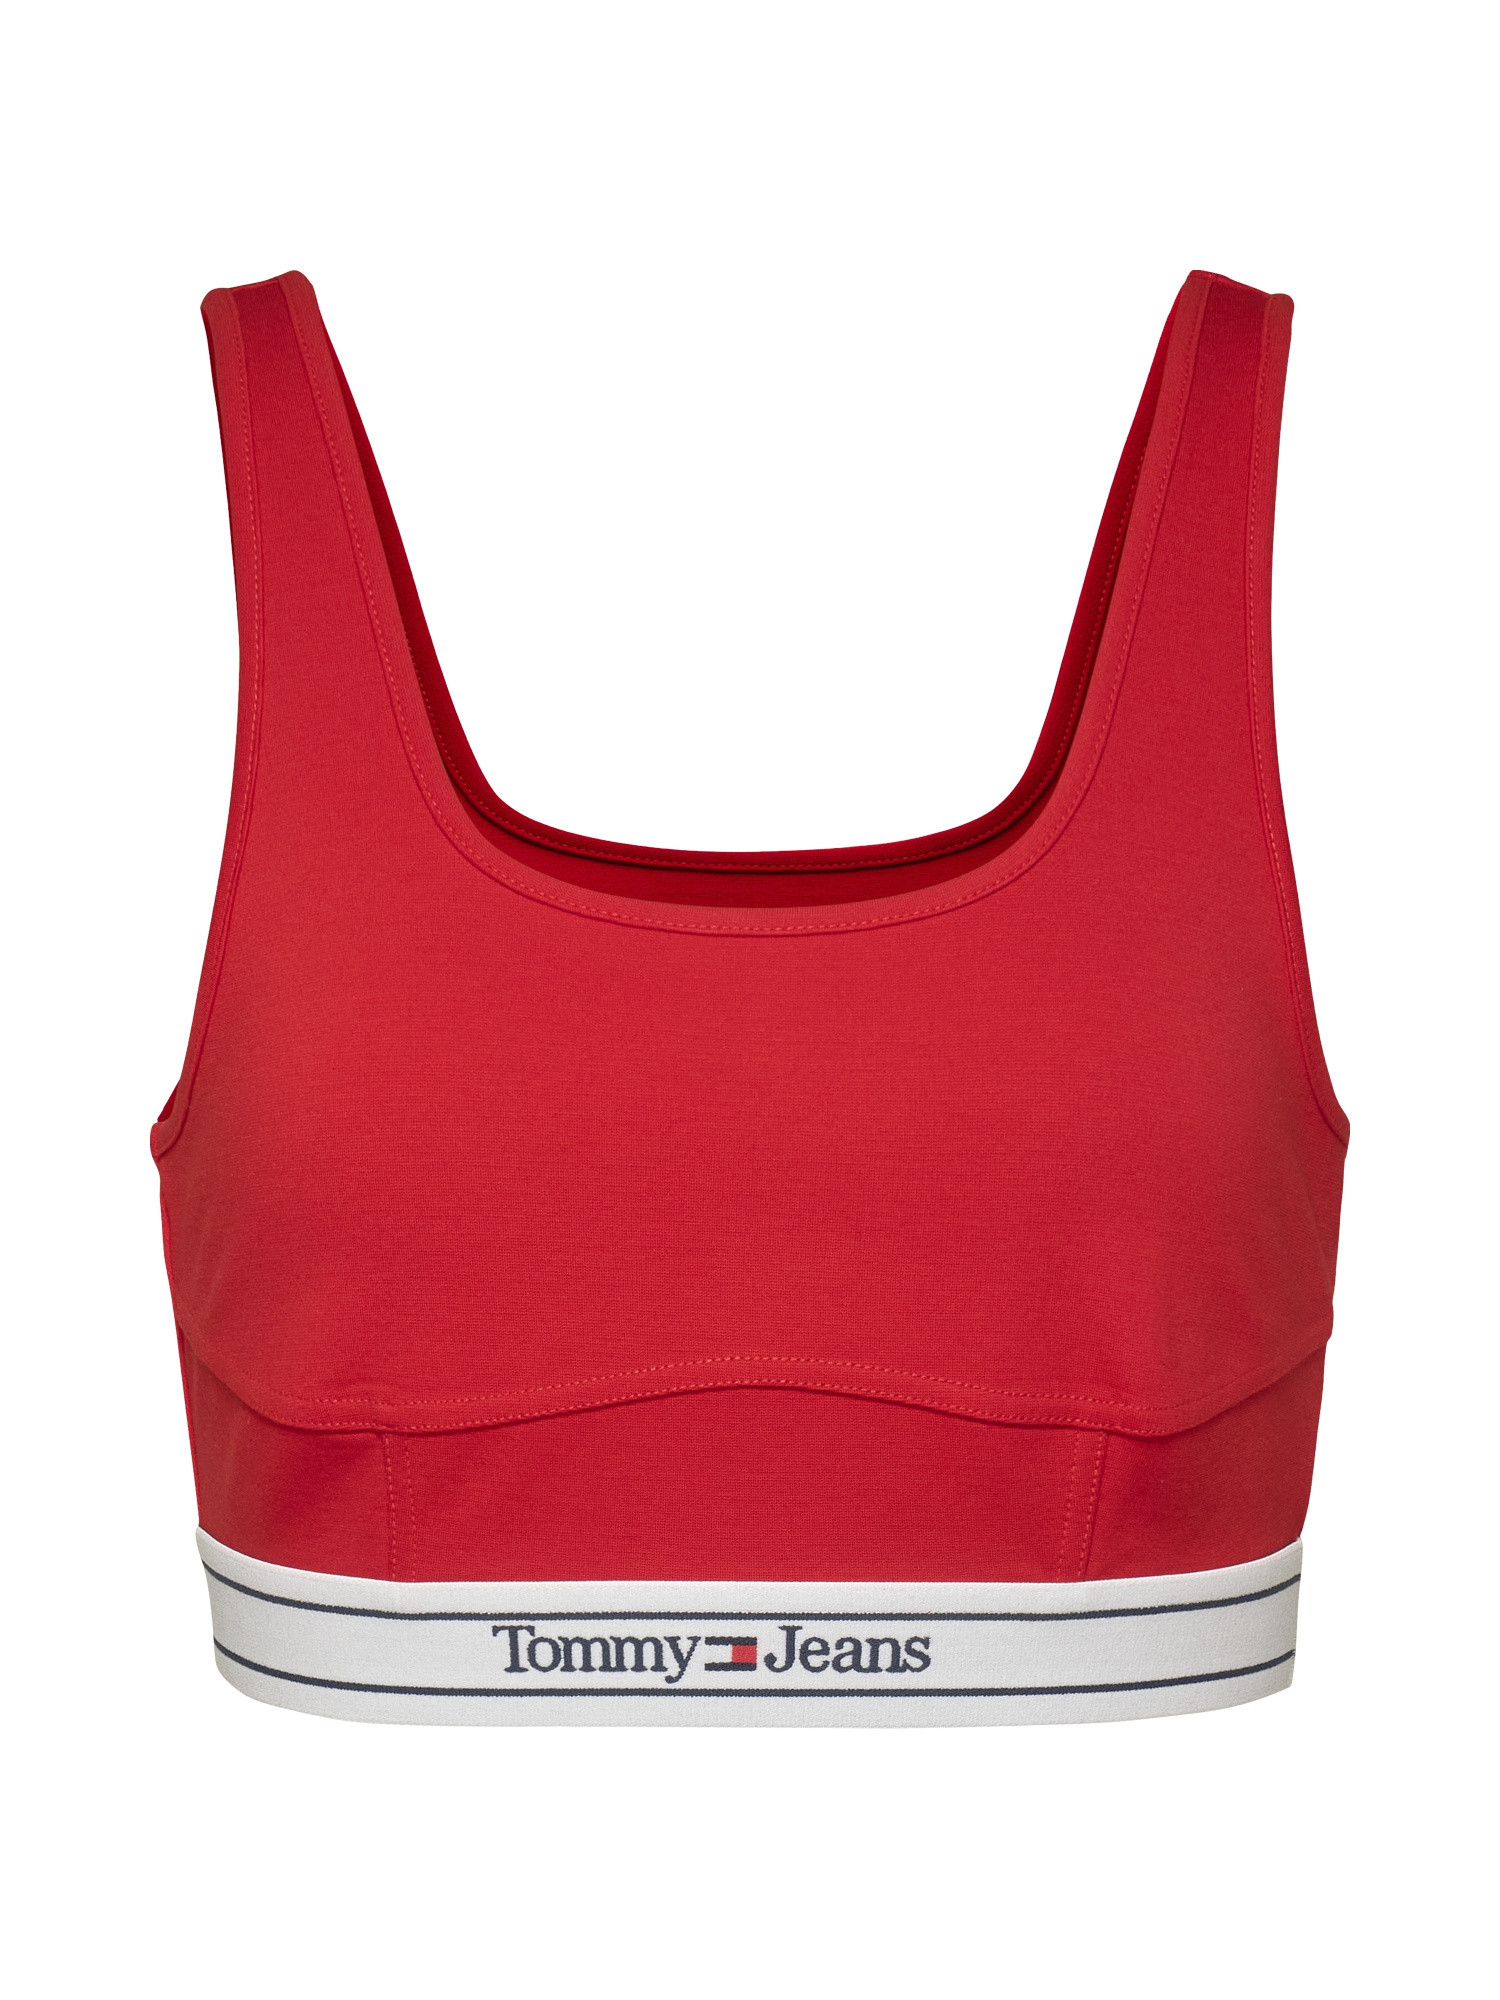 Tommy Jeans - Top sportivo con logo, Rosso, large image number 0